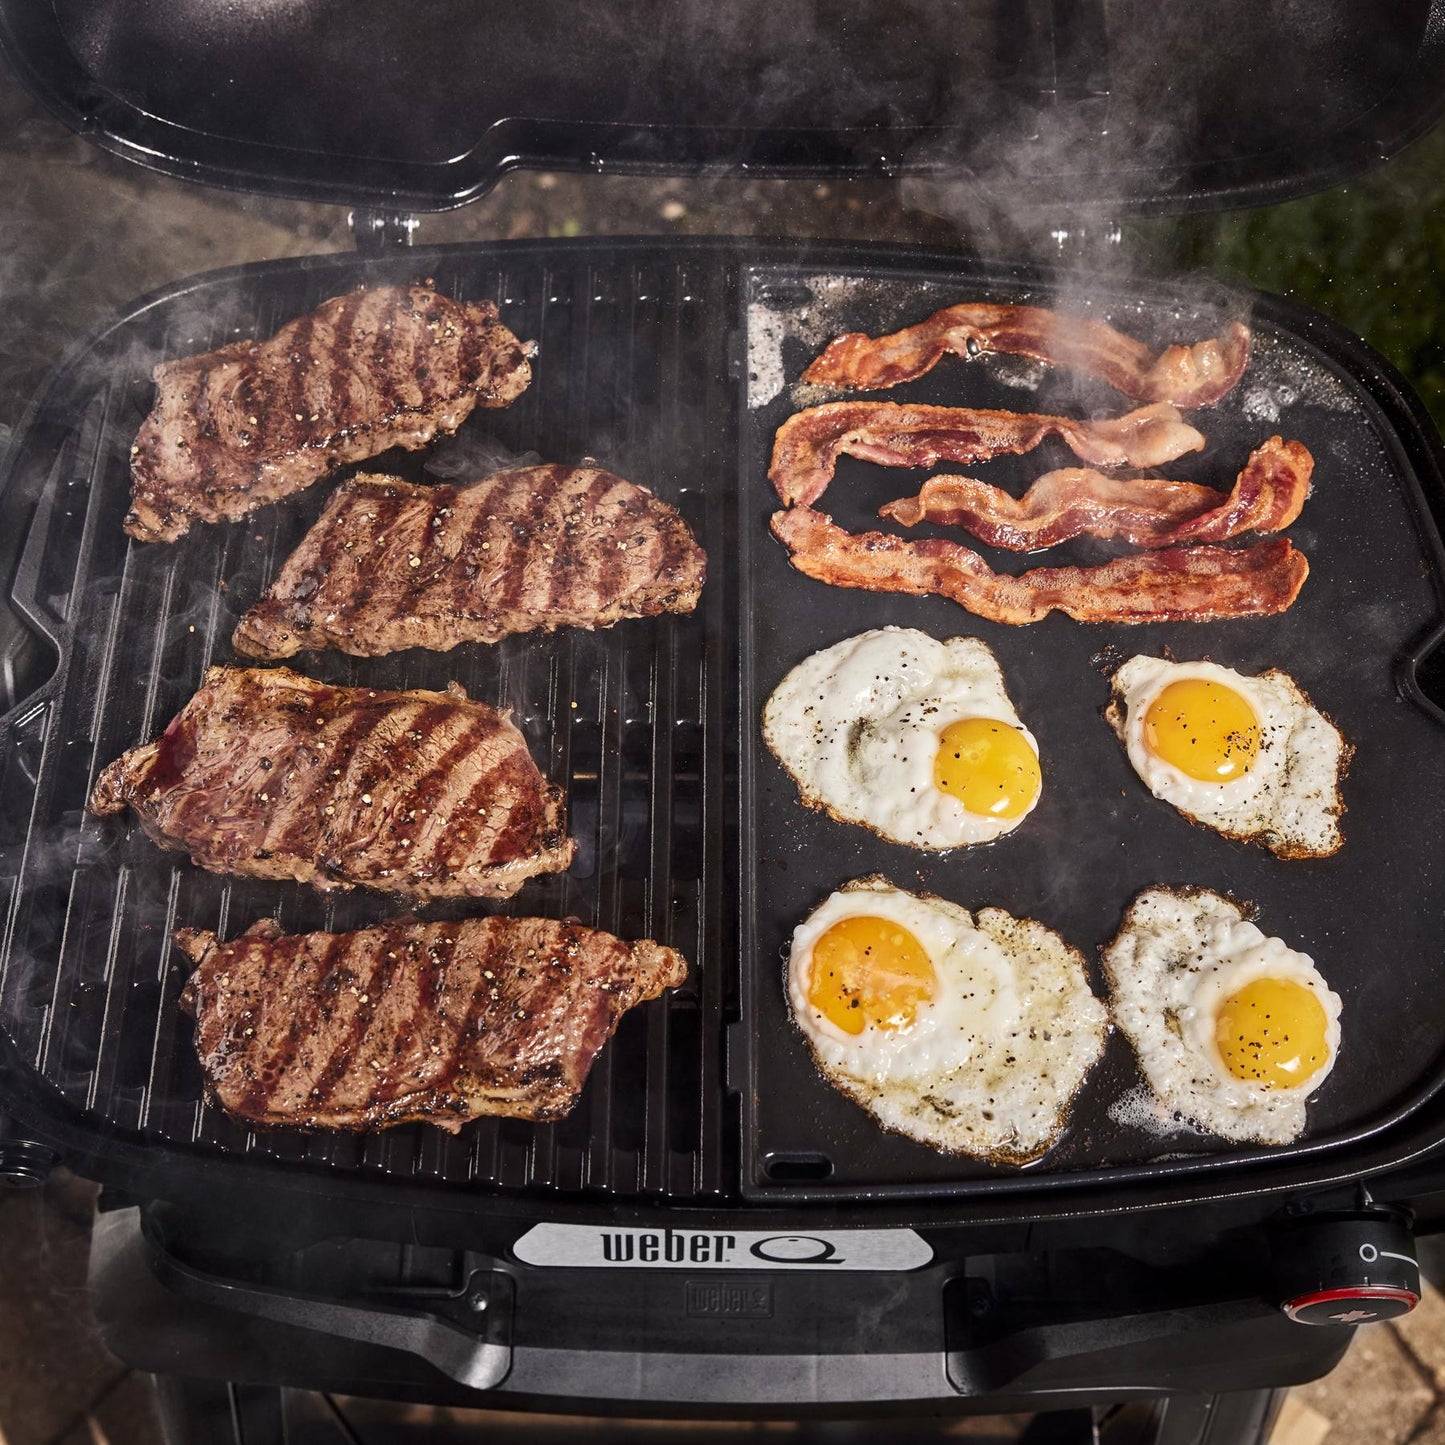 Weber 1500392 Q 2800N+ Gas Grill With Stand (Liquid Propane) - Smoke Grey